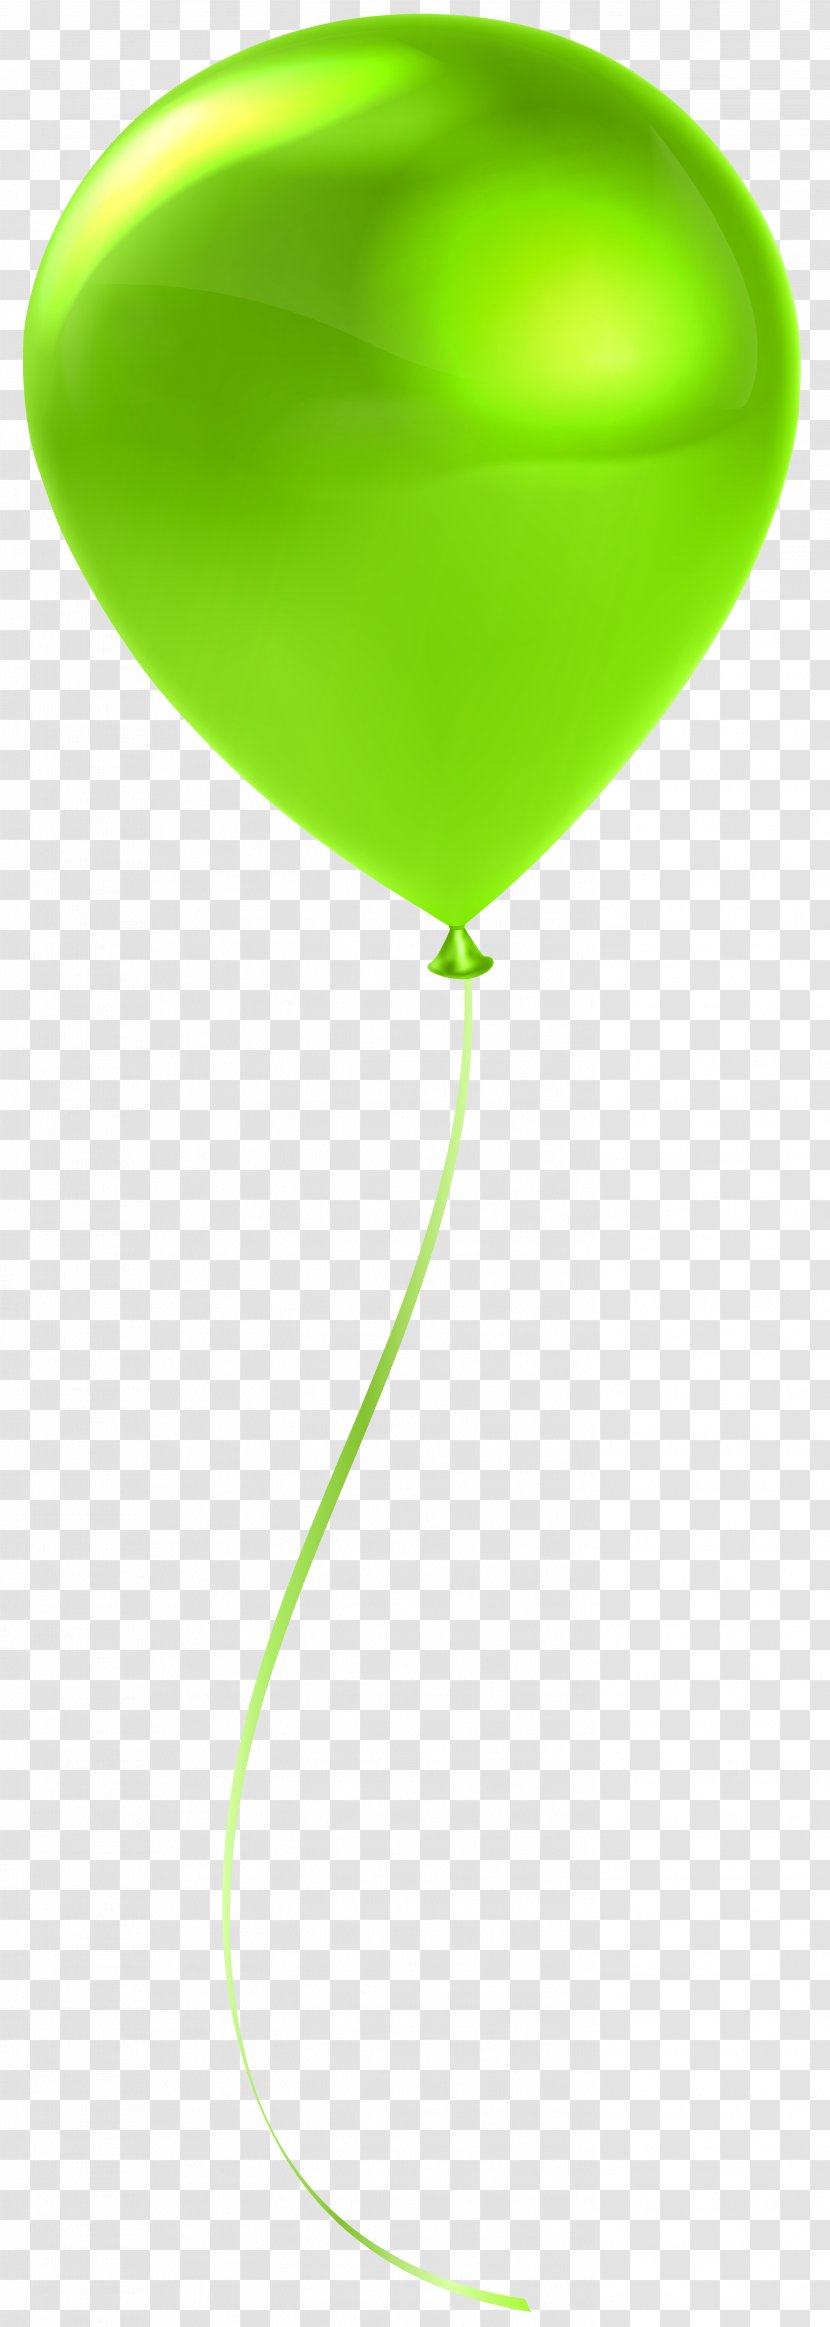 Balloon Clip Art - Image Resolution Transparent PNG